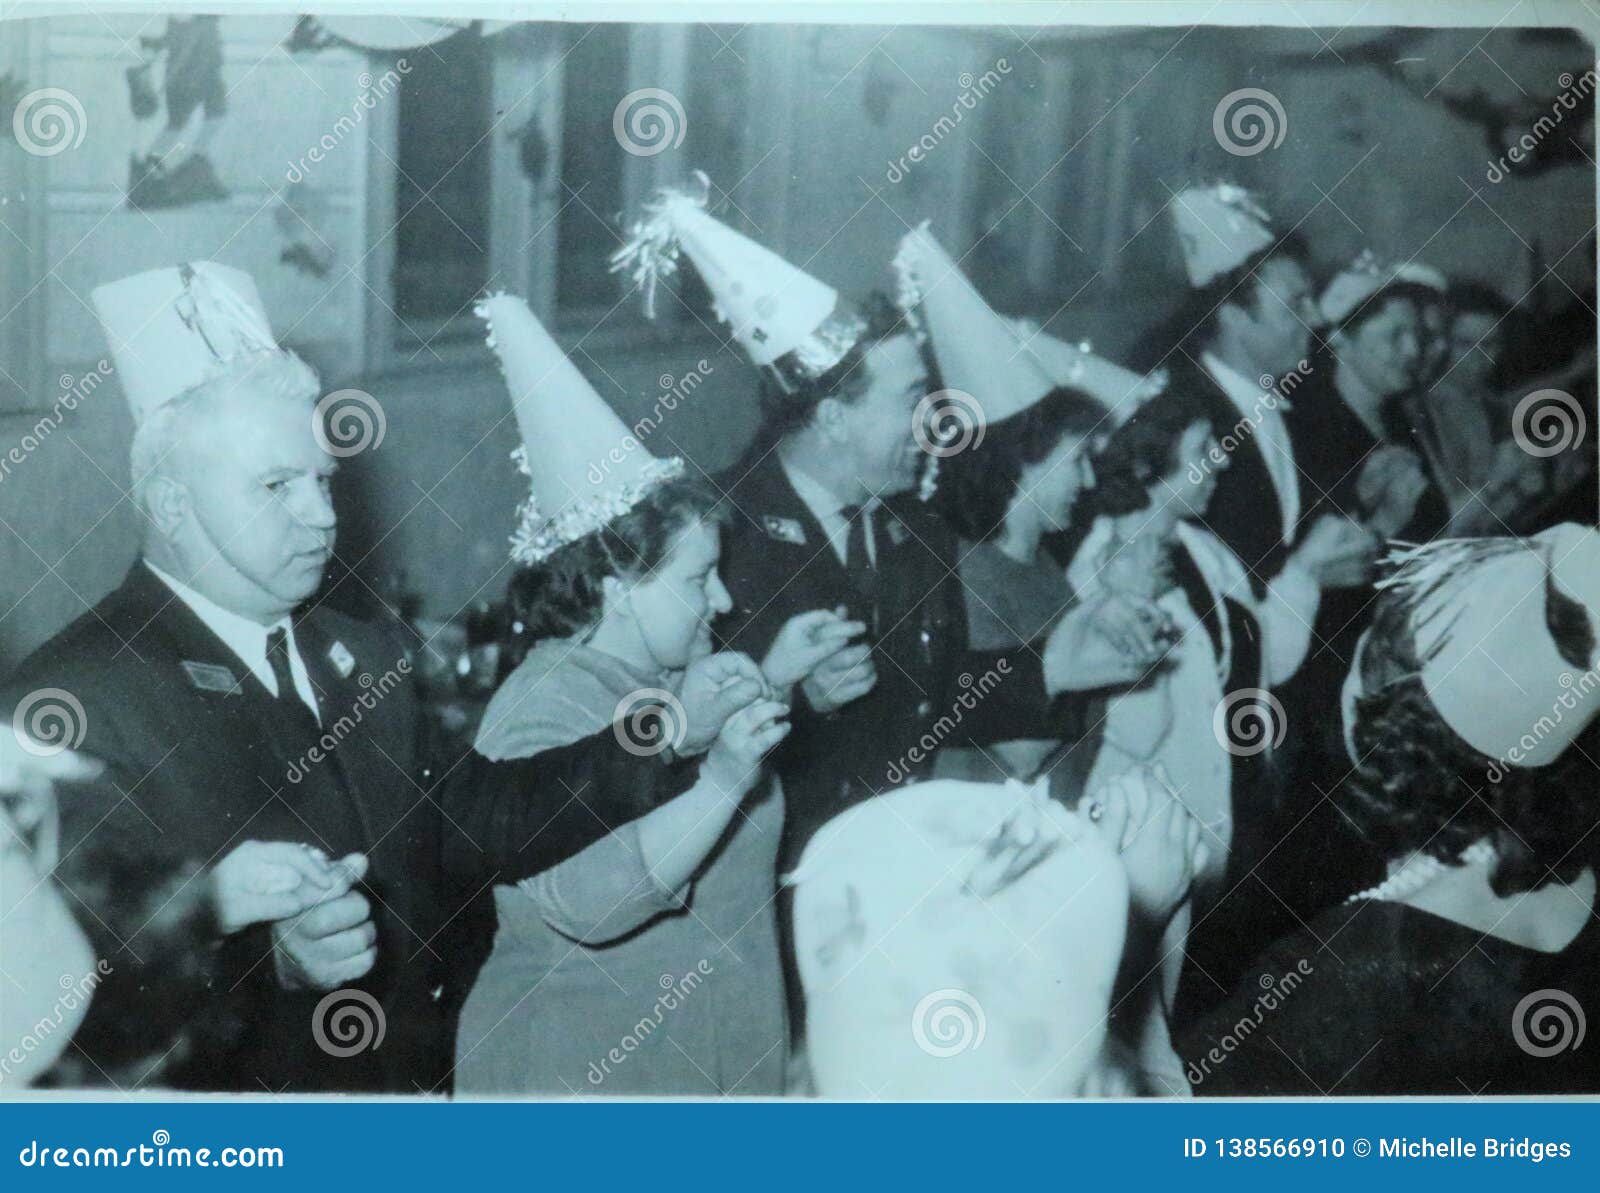 Vintage Black and White Photo of People at a Party and Wearing Funny Hat, Christmas Party? 1950s European. Editorial Image Image of fashion, christmas: 138566910